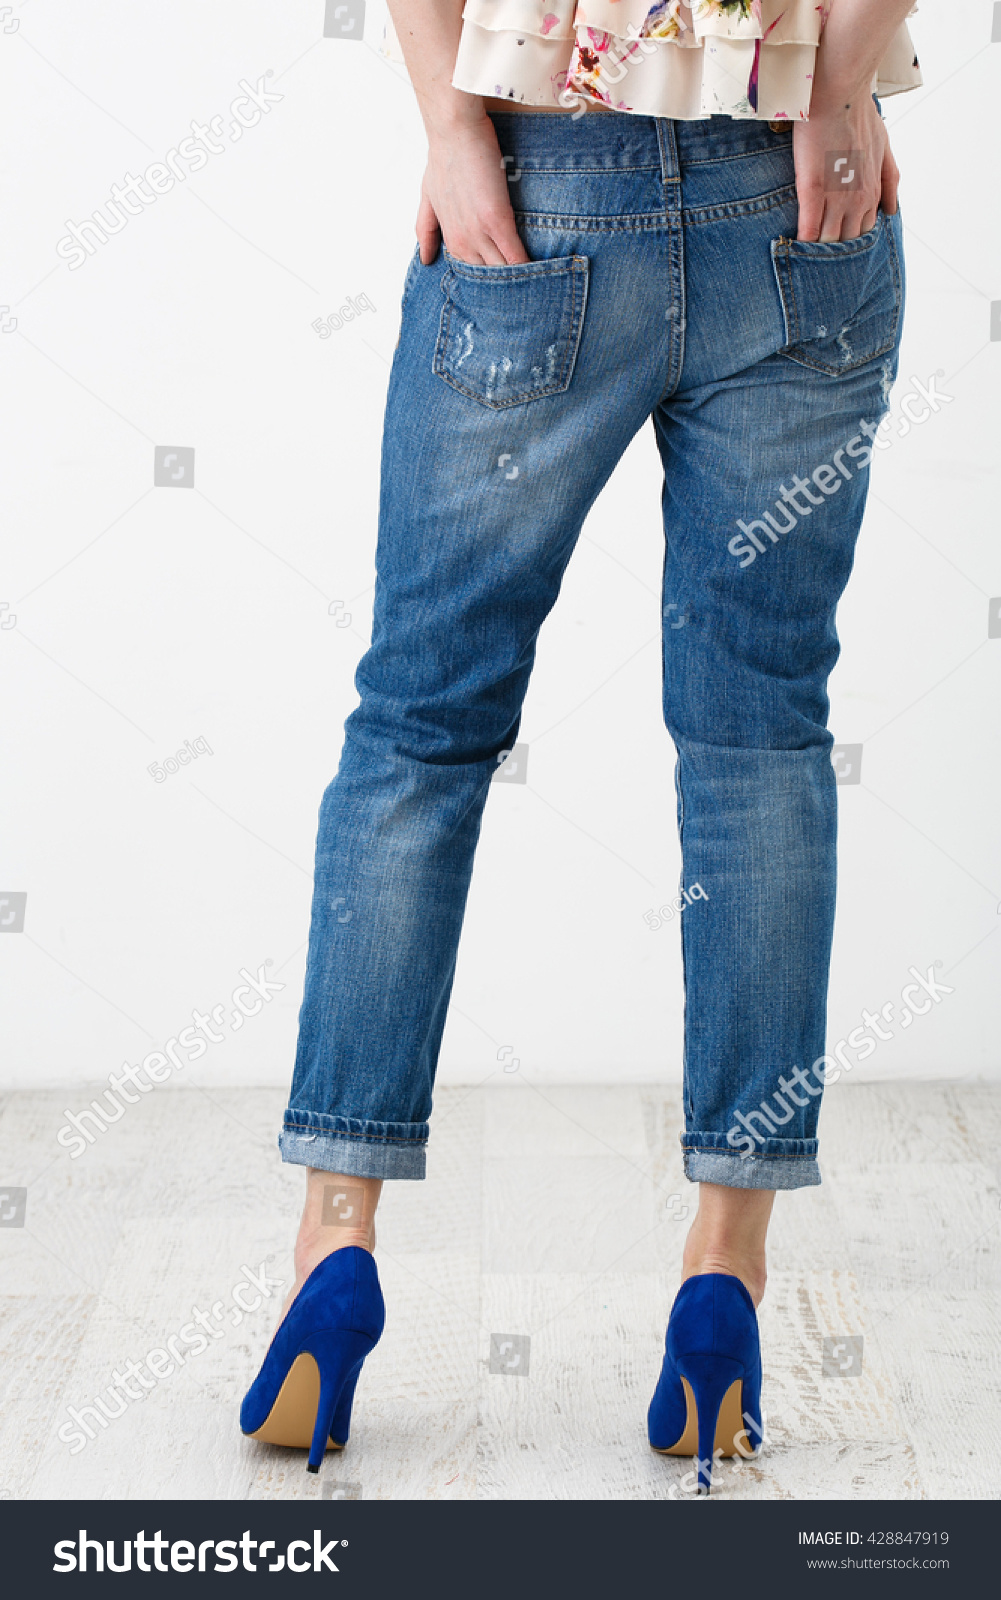 blue suede shoes and jeans